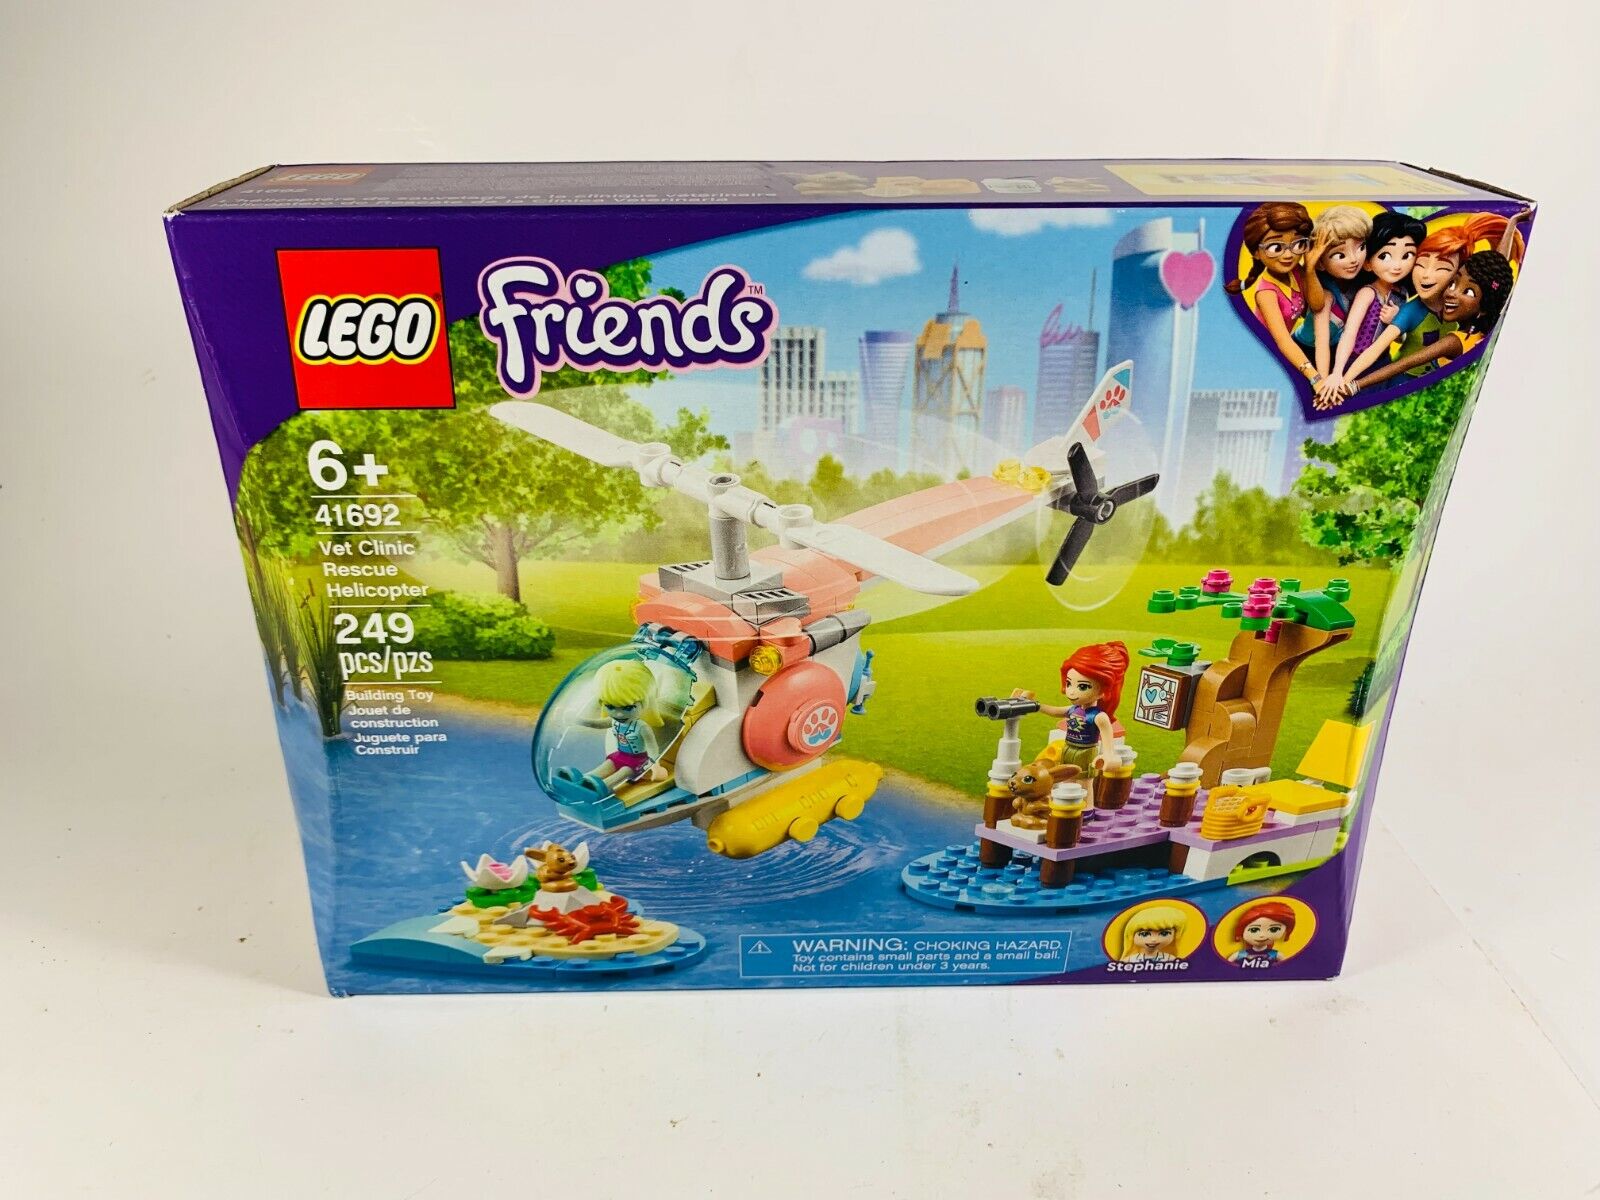 LEGO Friends Vet Clinic Rescue Helicopter 41692 Building Kit 249 Pieces New 